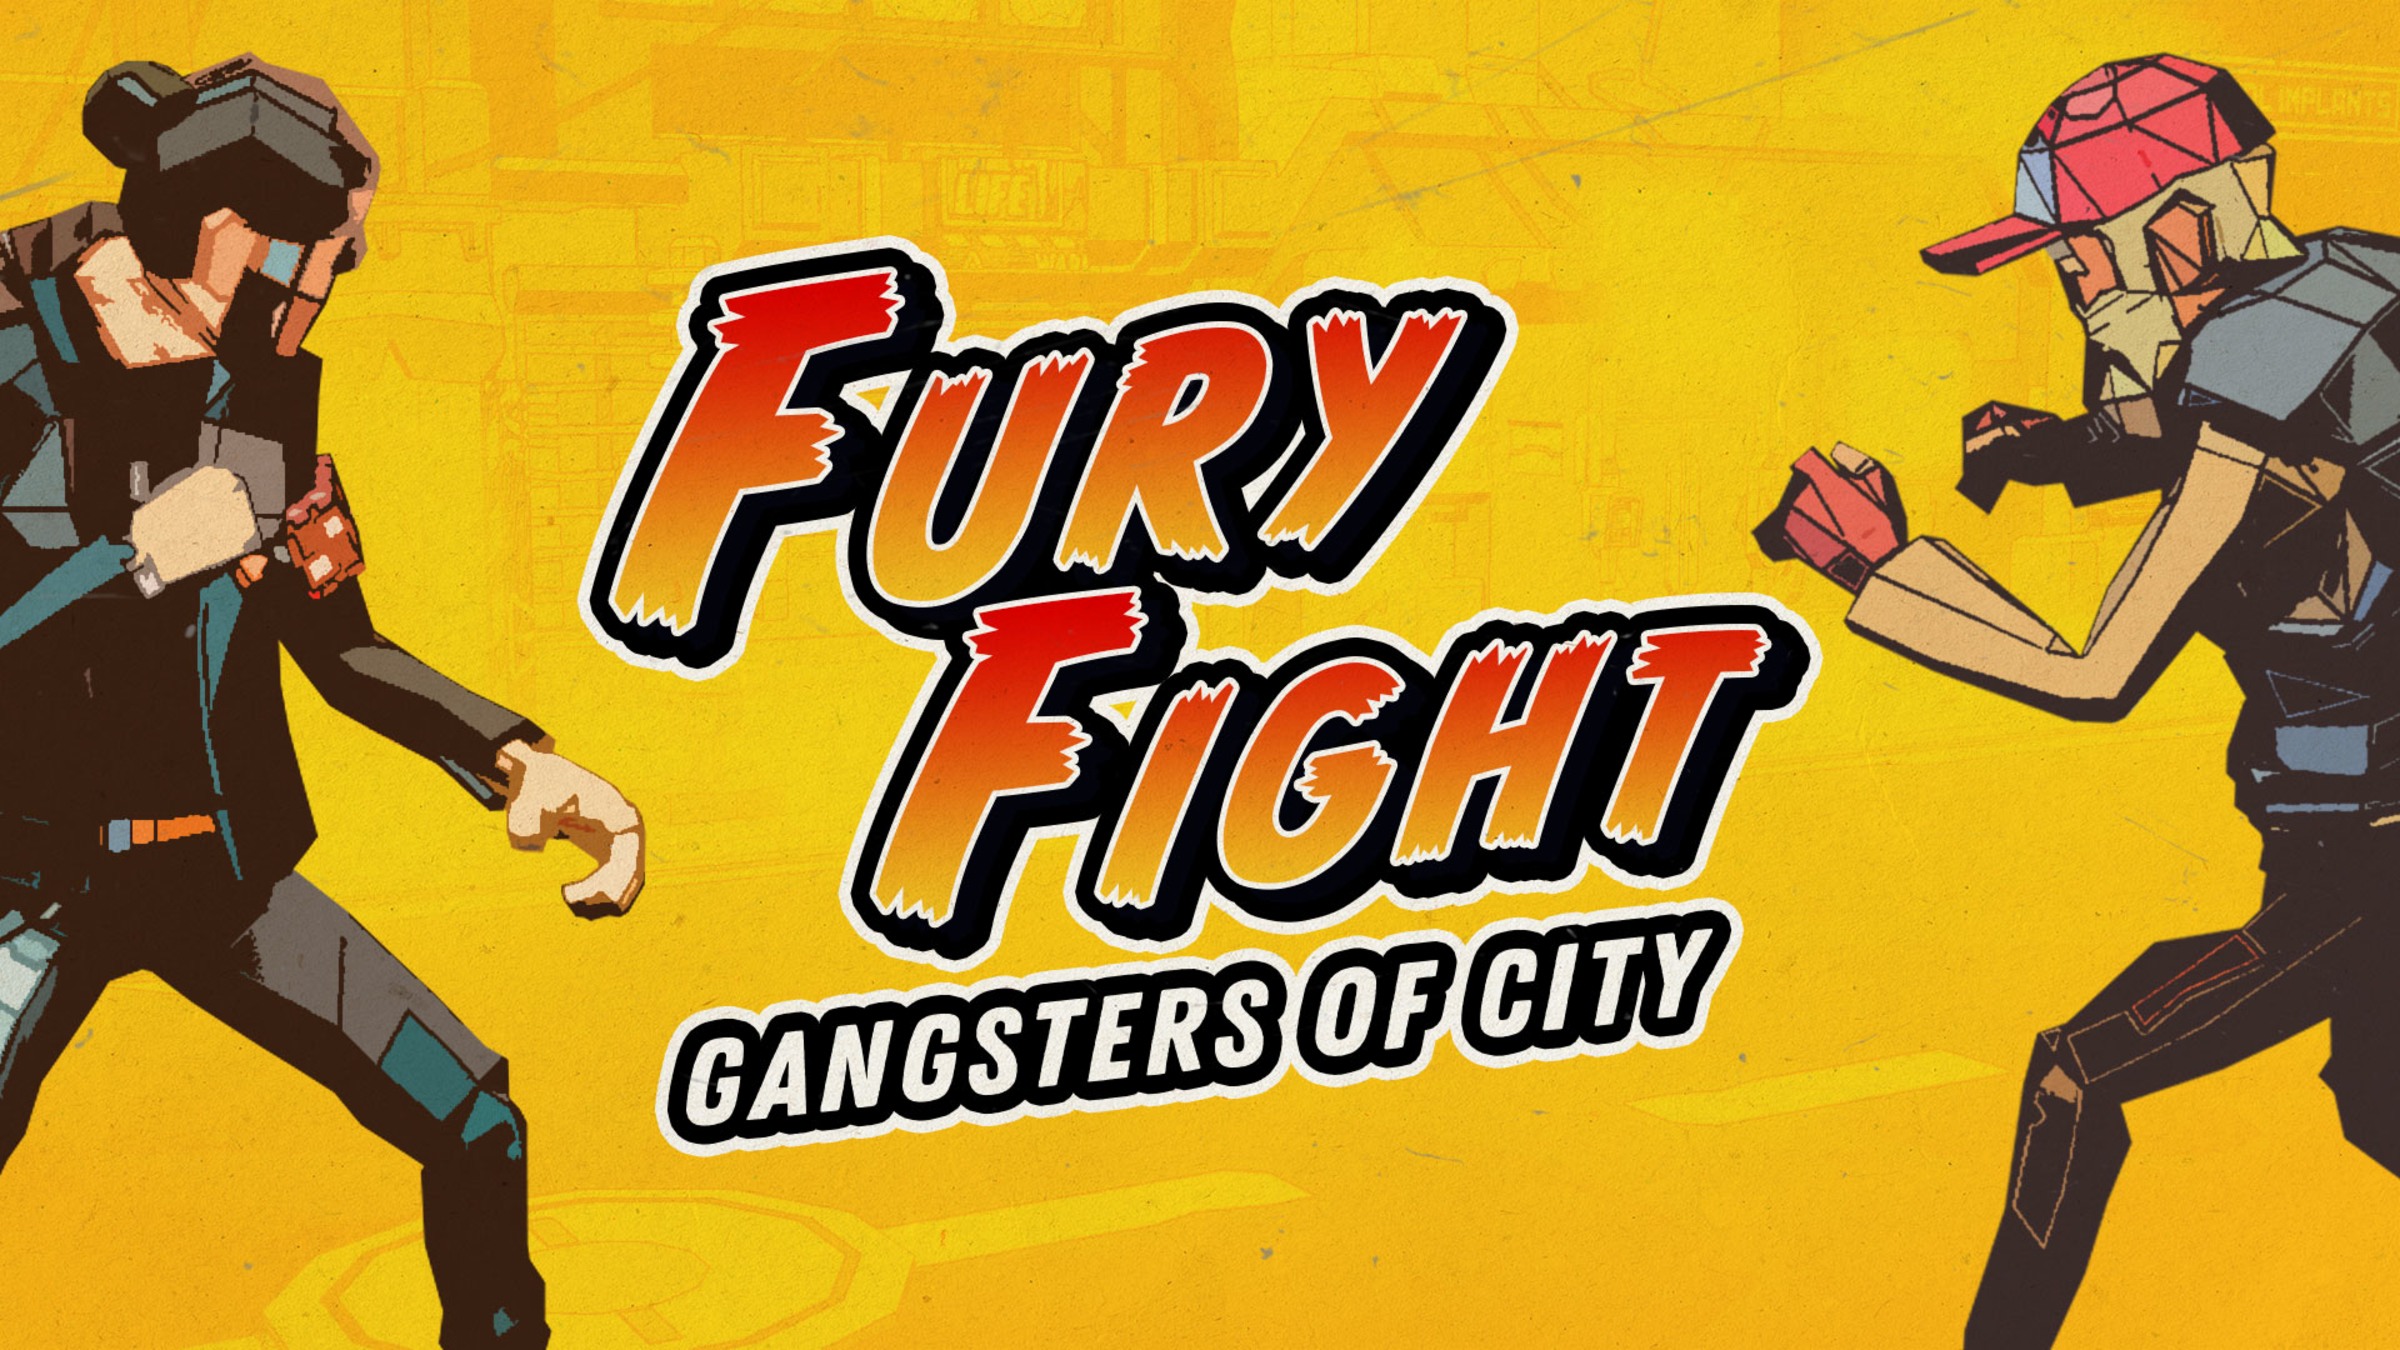 https://assets.nintendo.com/image/upload/c_fill,w_1200/q_auto:best/f_auto/dpr_2.0/ncom/en_US/games/switch/f/fury-fight-gangsters-of-city-switch/